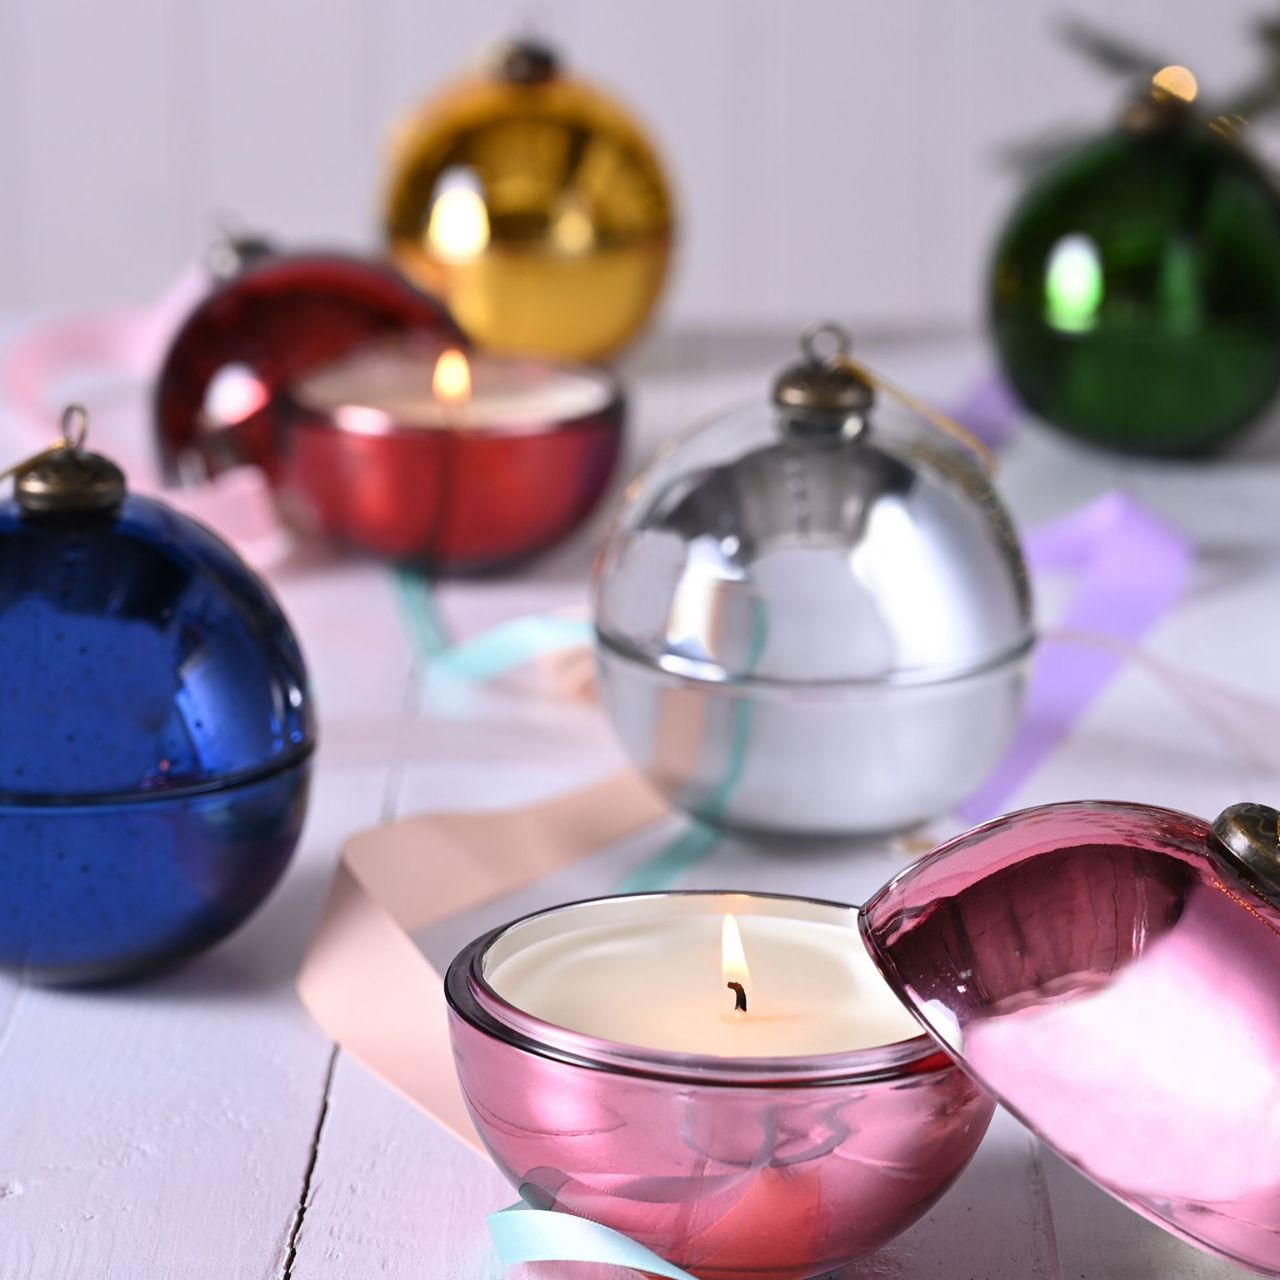 Red Mulled Wine Fragranced Glass Bauble Candle  A Mulled Wine fragranced glass bauble candle.  This aromatic candle makes an eye-catching addition to homes during the festive season.